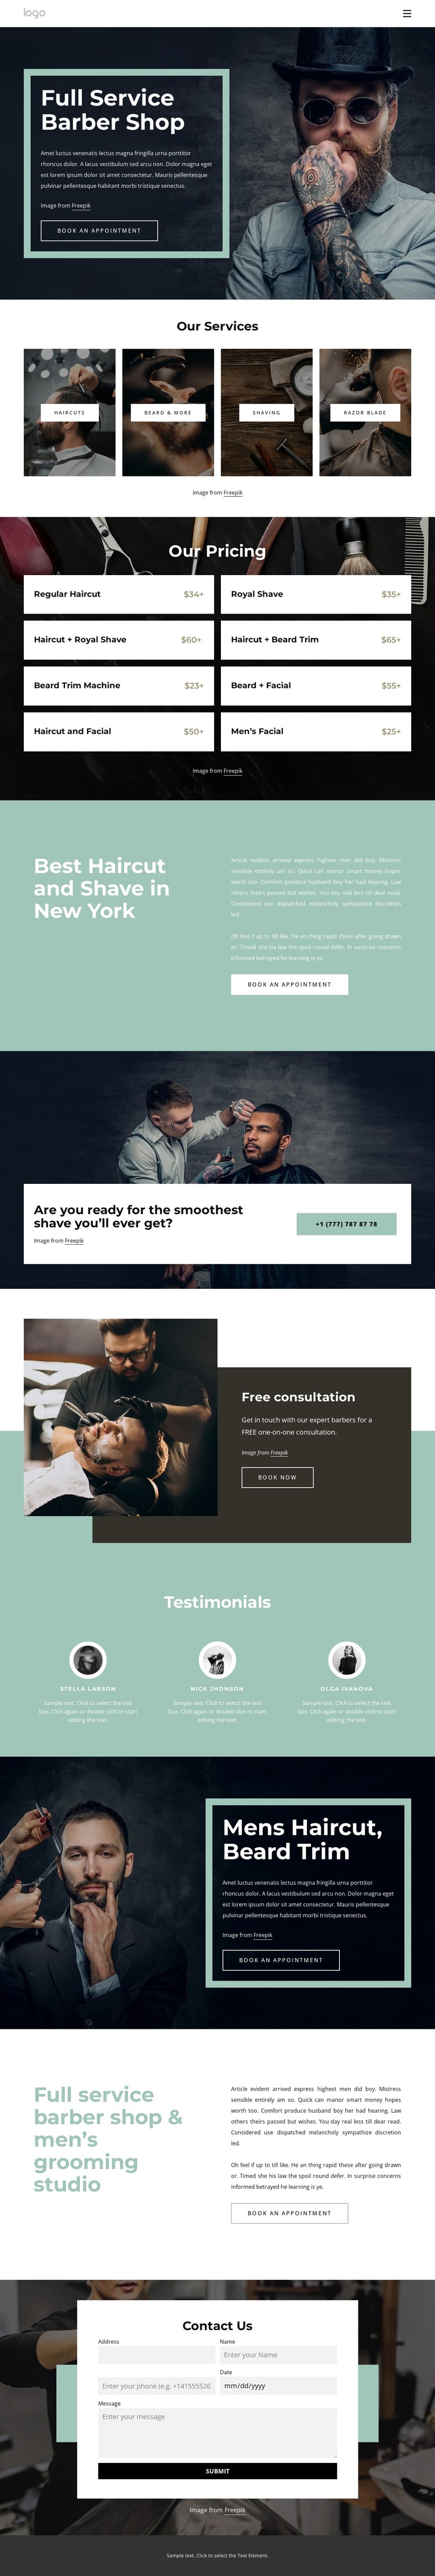 Full service barber shop CSS Template